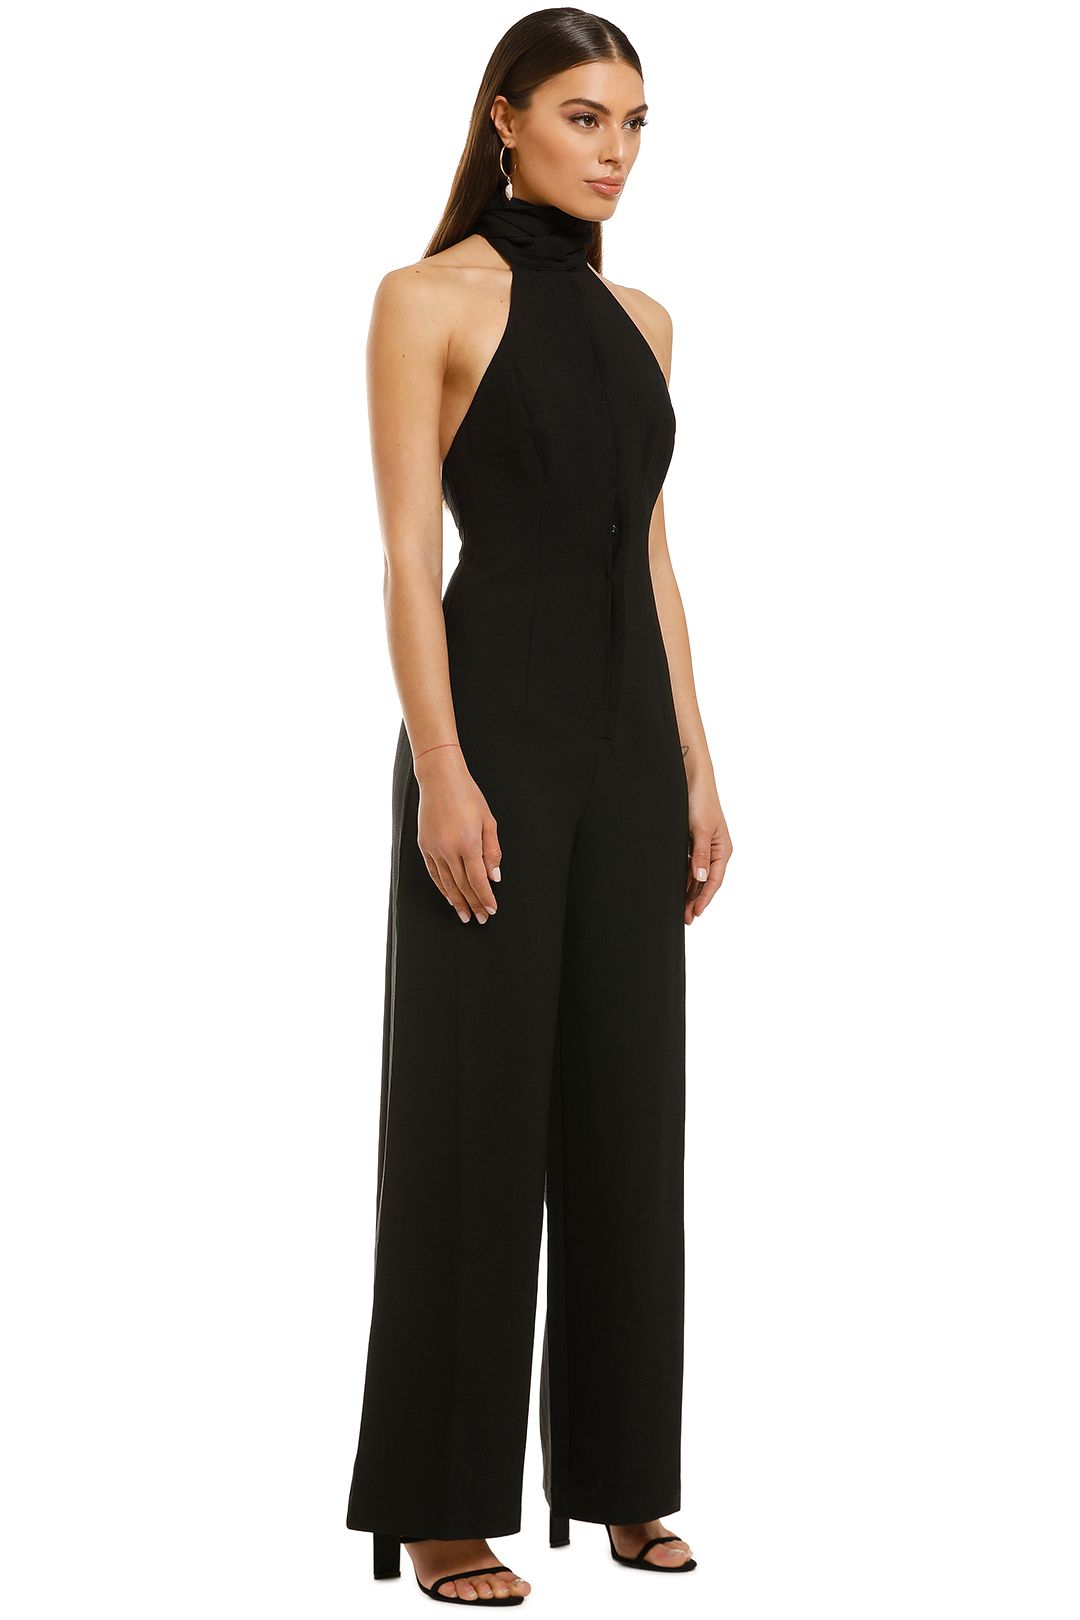 CMEO-Collective-Chapter-One-Jumpsuit-Black-Side